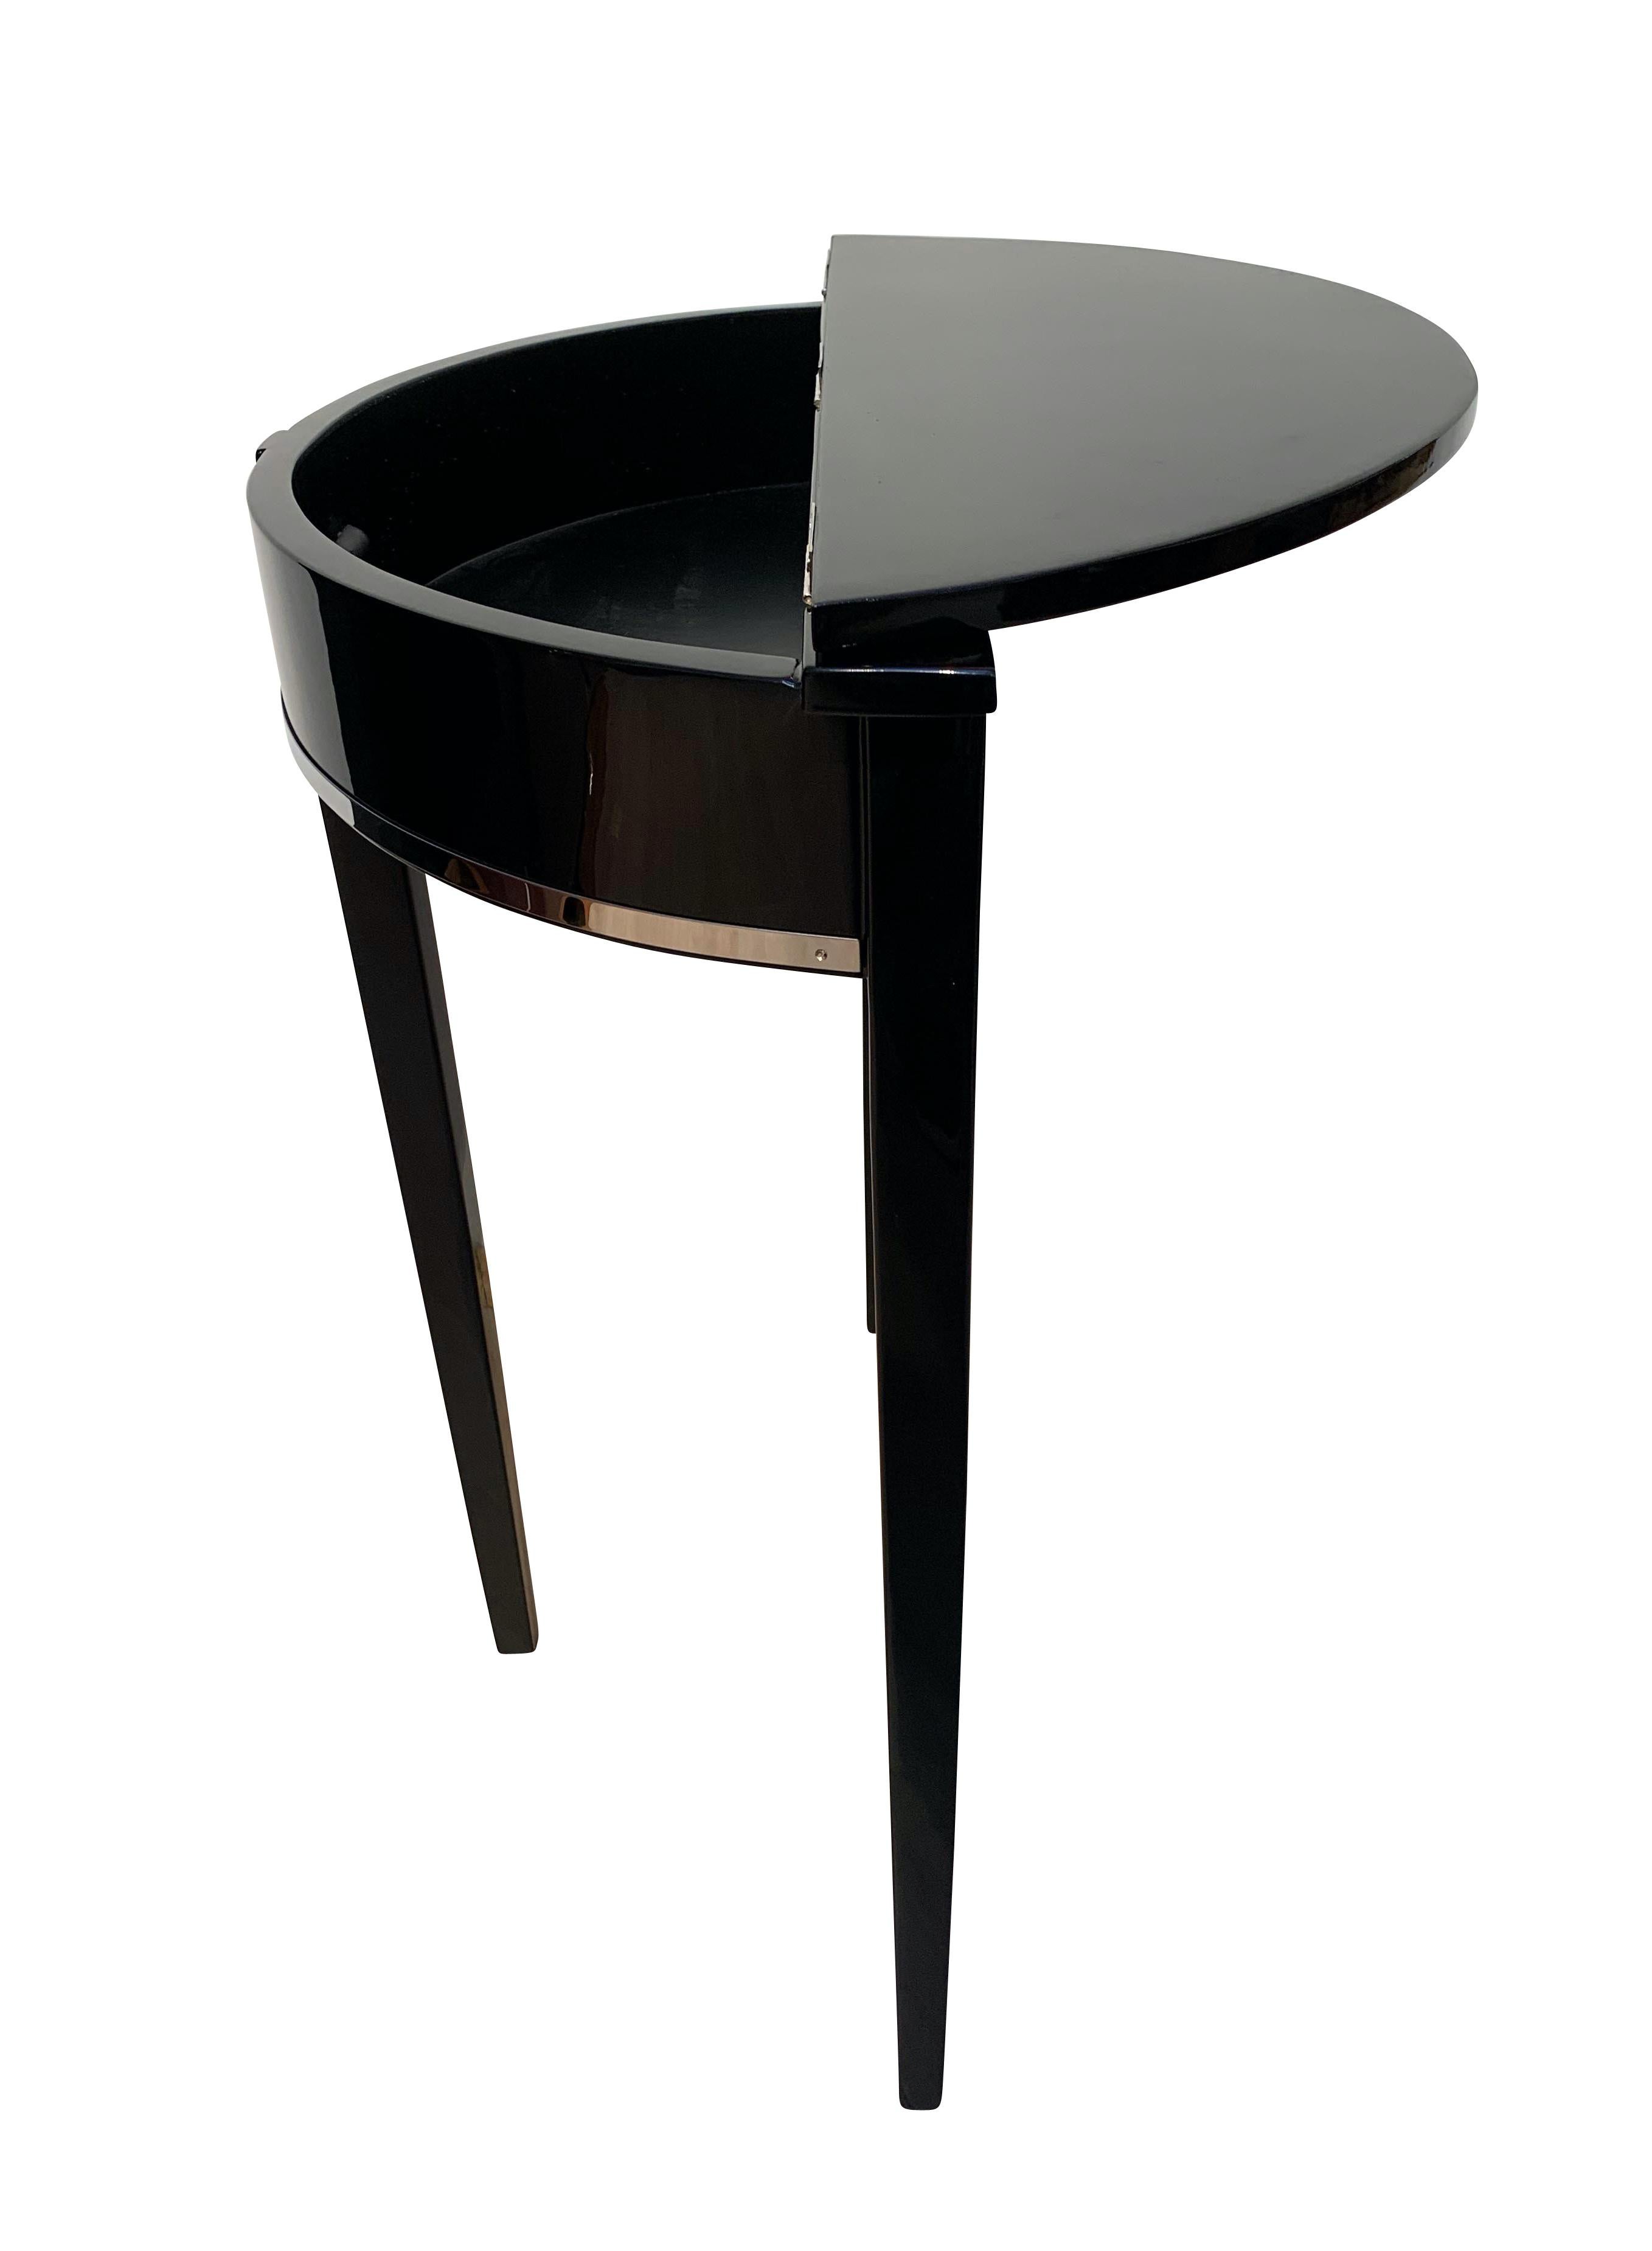 Art Deco demilune console table, black piano lacquer on oak, France, circa 1930

Oak solid wood, high-gloss black piano lacquered. Nickel-plated decorative trims. Newly galvanized old hinges.
Inside and underneath in satin black lacquer.